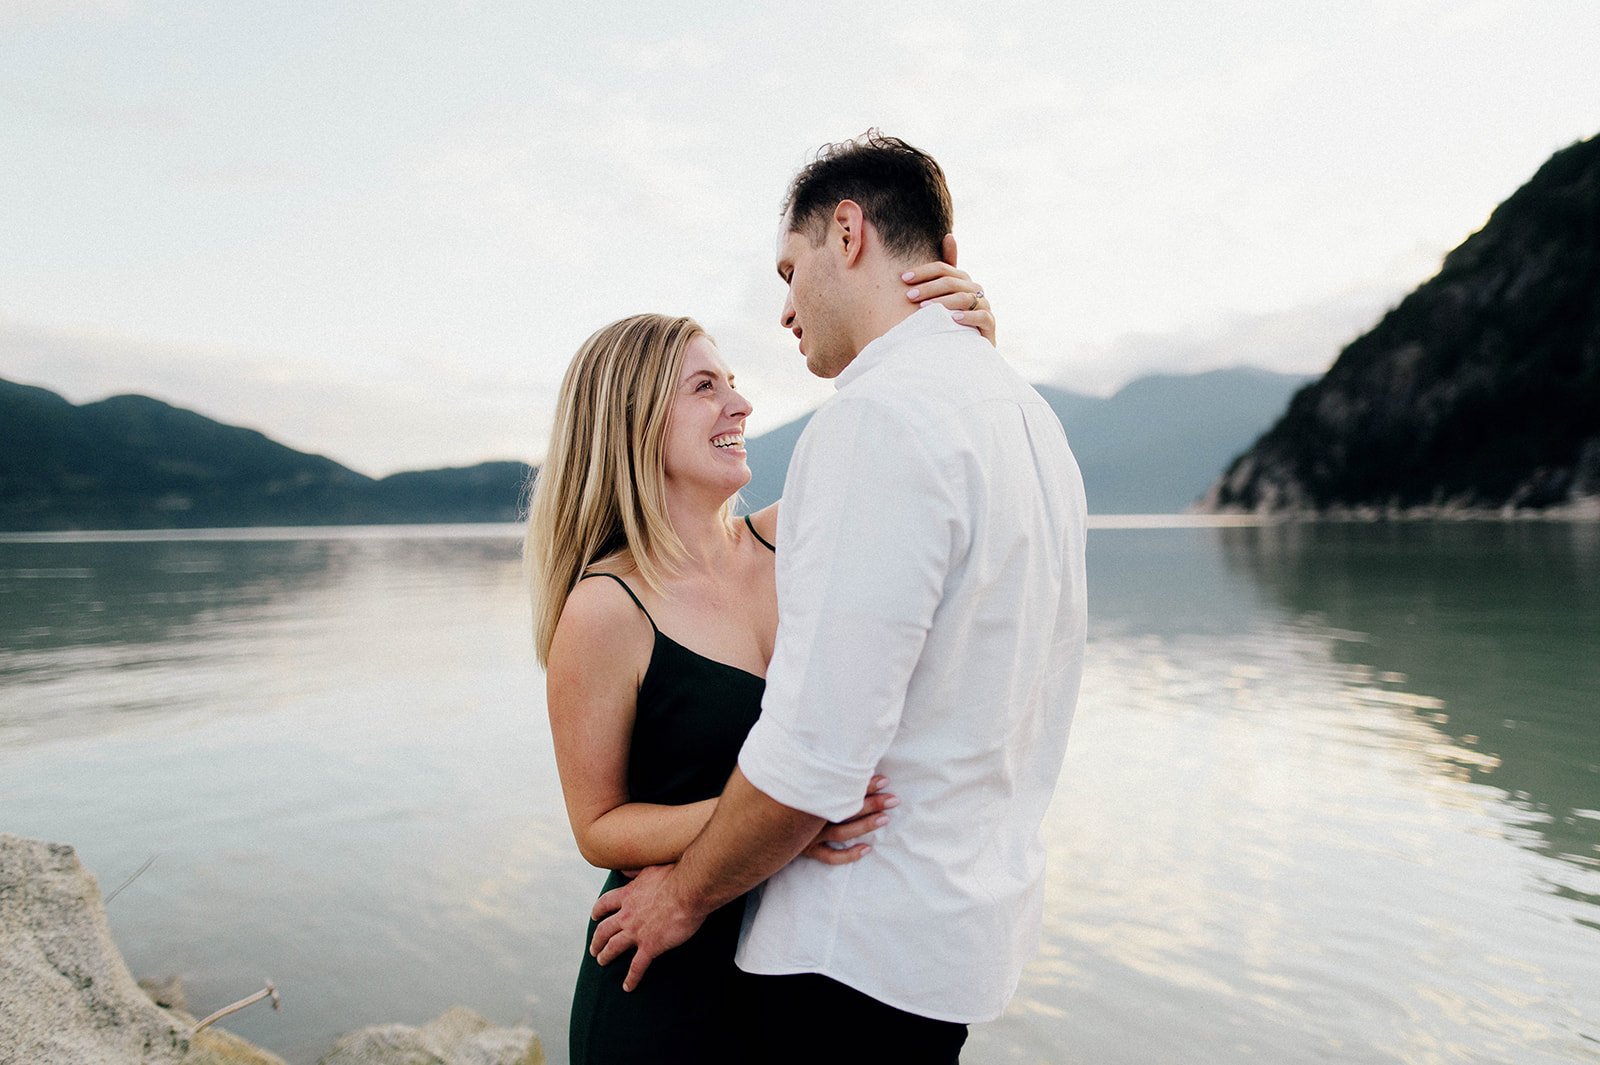 A man and woman embrace and smile at each other in front of a scenic lake surrounded by mountains in Squamish, BC   